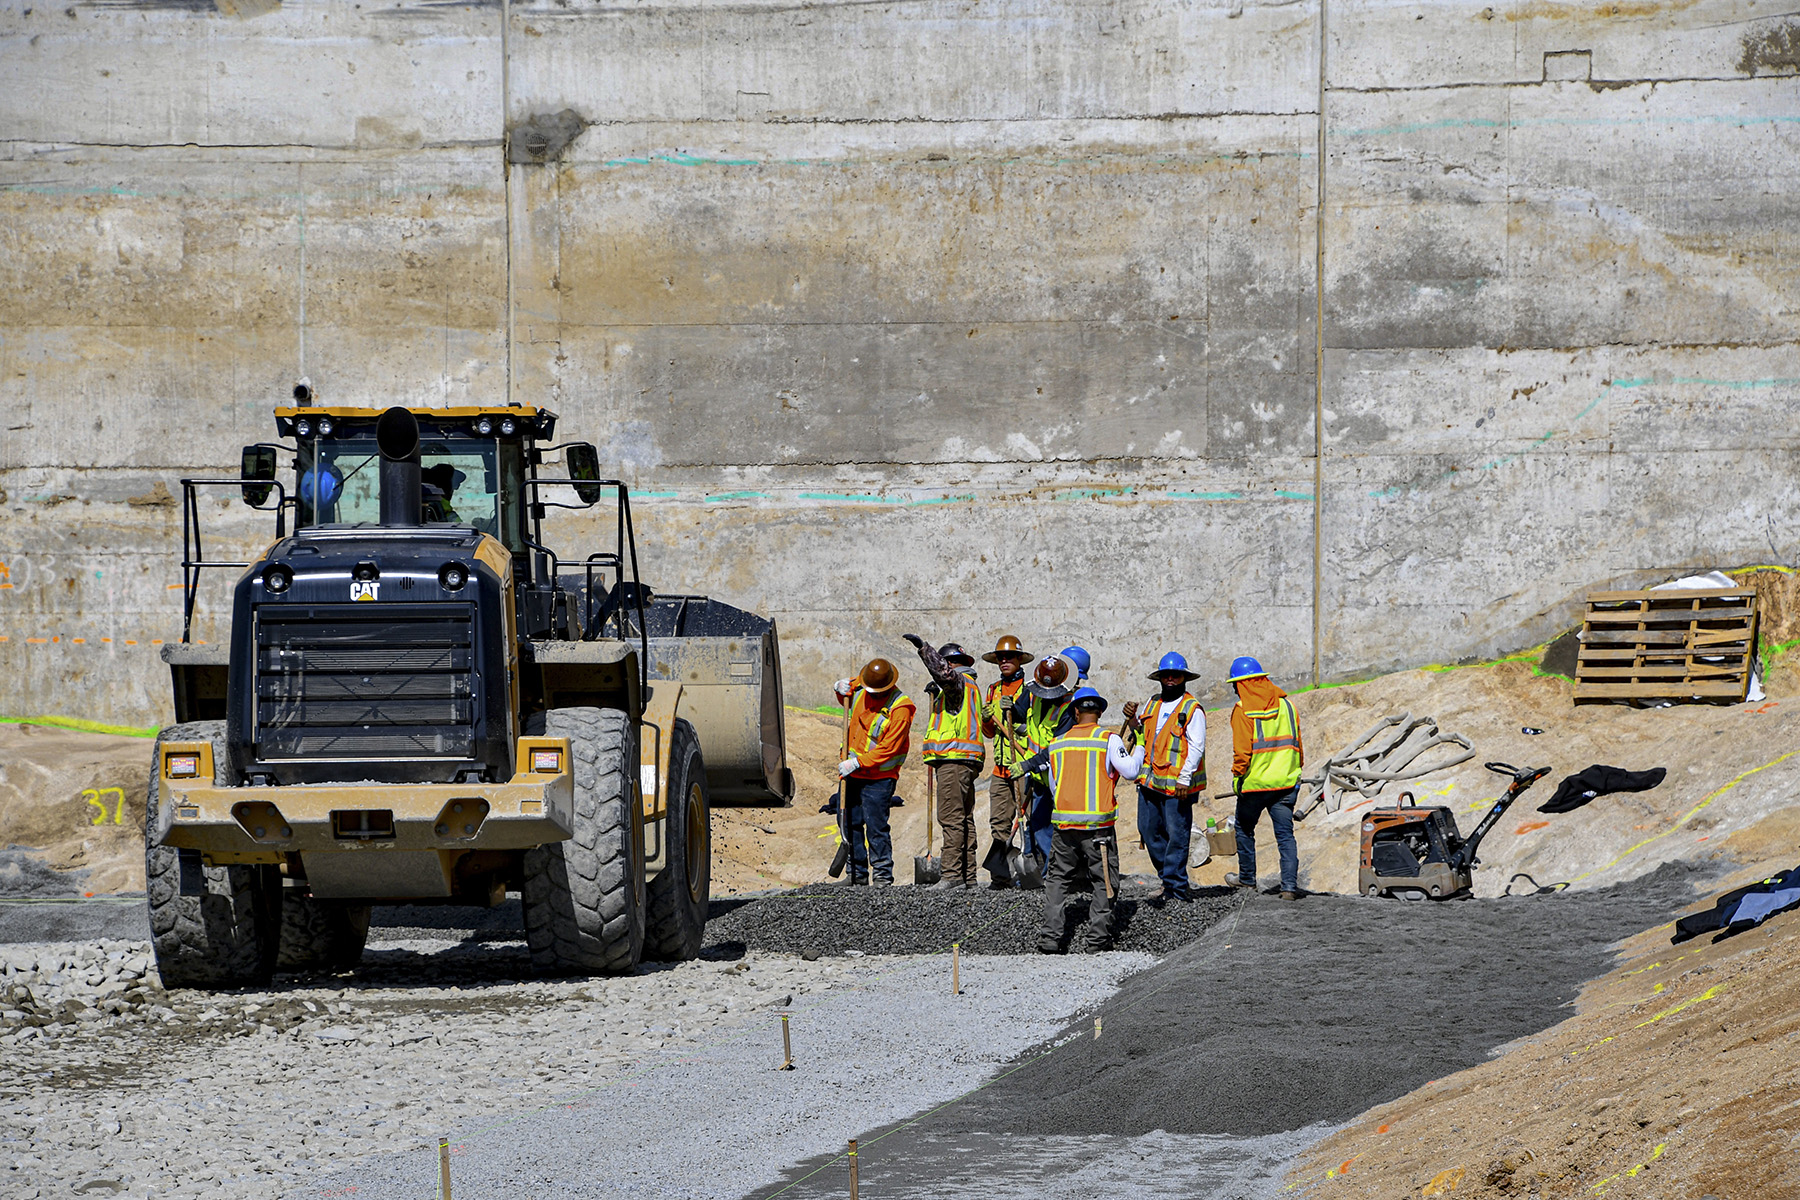 A vehicle with large wheels and a scooper in the front moves dirt around. Workers in hard hats and safety vests shovel the dirt.